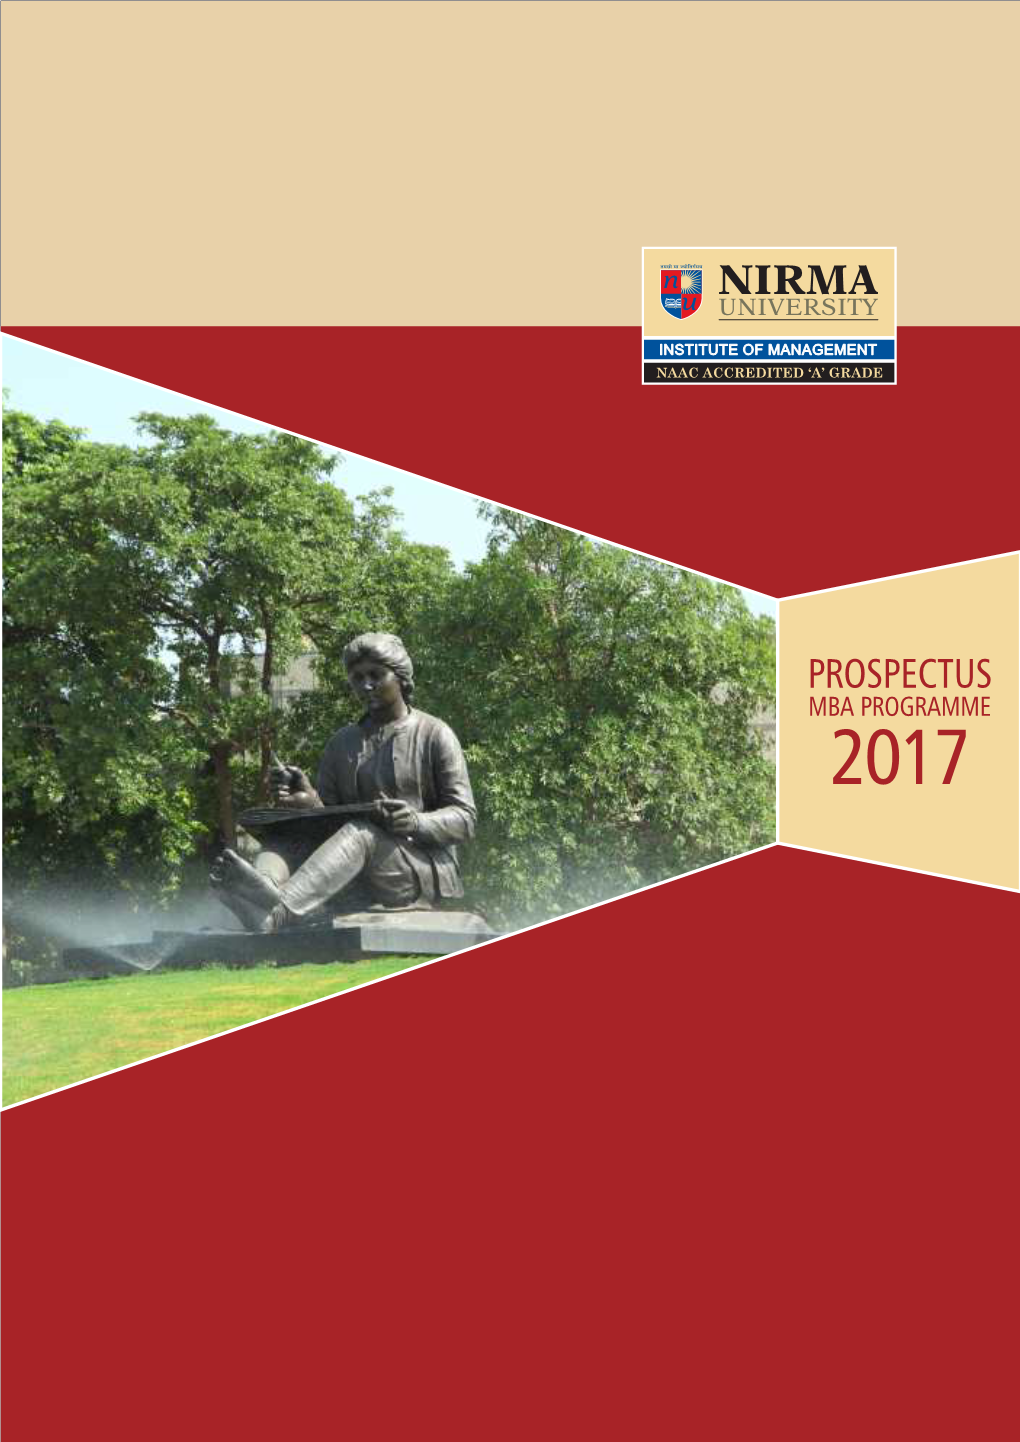 PROSPECTUS MBA PROGRAMME 2017 VISION Shaping a Better Future for Mankind by Developing Effective and Socially Responsible Individuals and Organizations